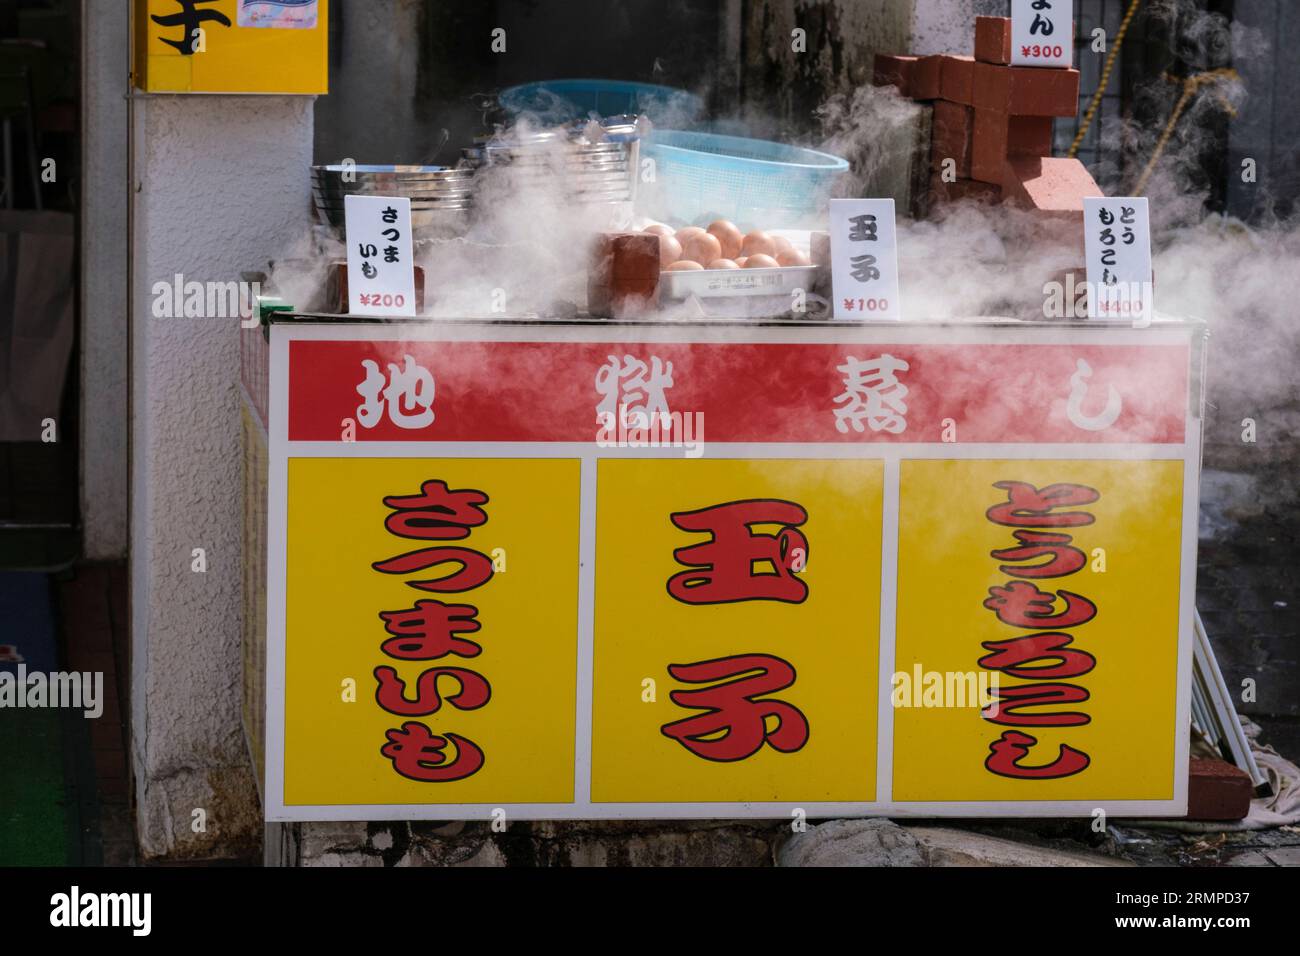 Japan, Kyushu, Beppu. Boiling Eggs with Steam from Hot Springs. Stock Photo